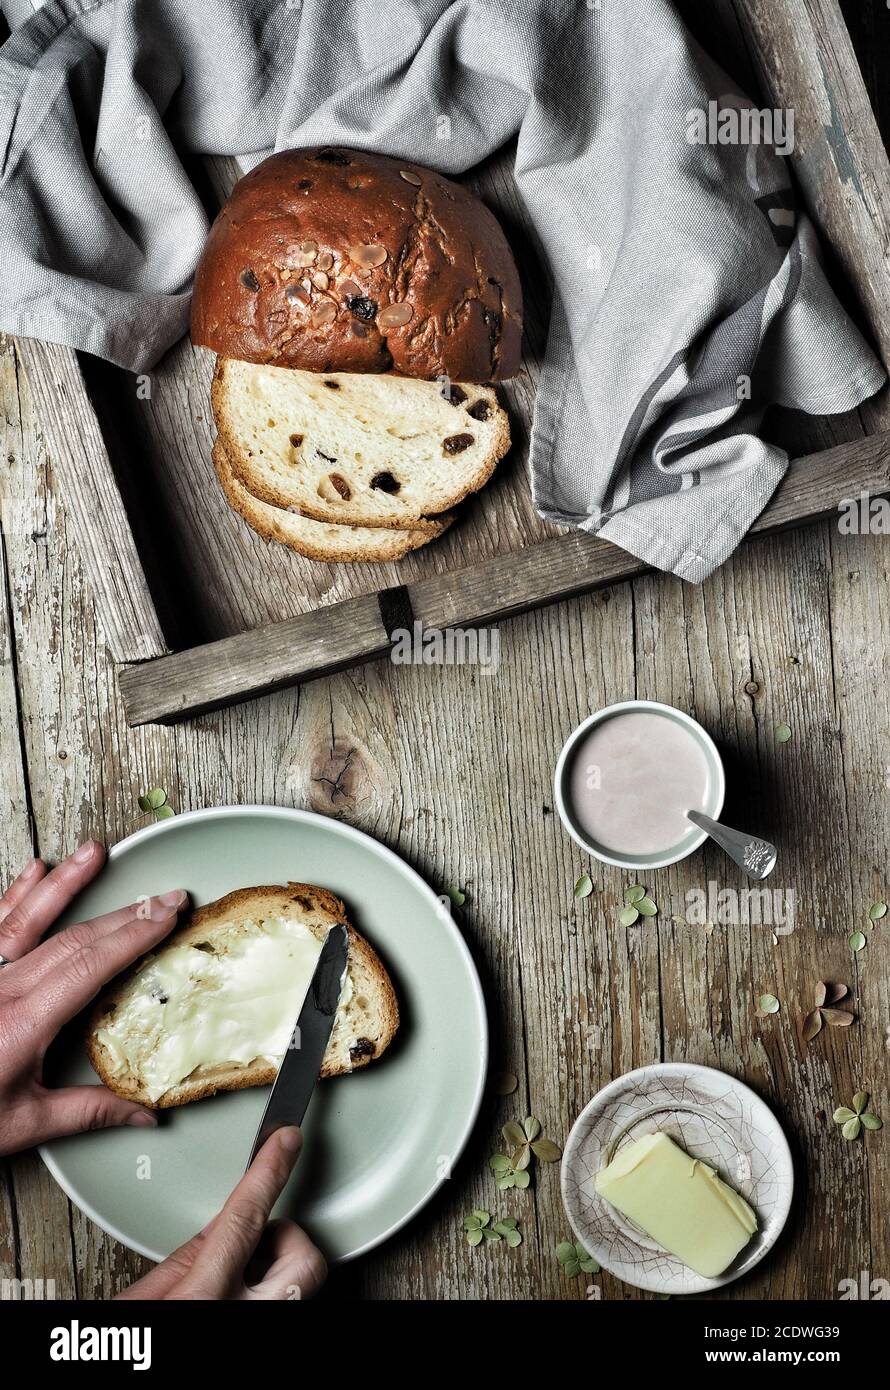 Sweet bread, typical Slovak cake. A cup of cocoa milk and woman hands spreading butter on plate. Vintage wooden background. Overhead shot. Stock Photo